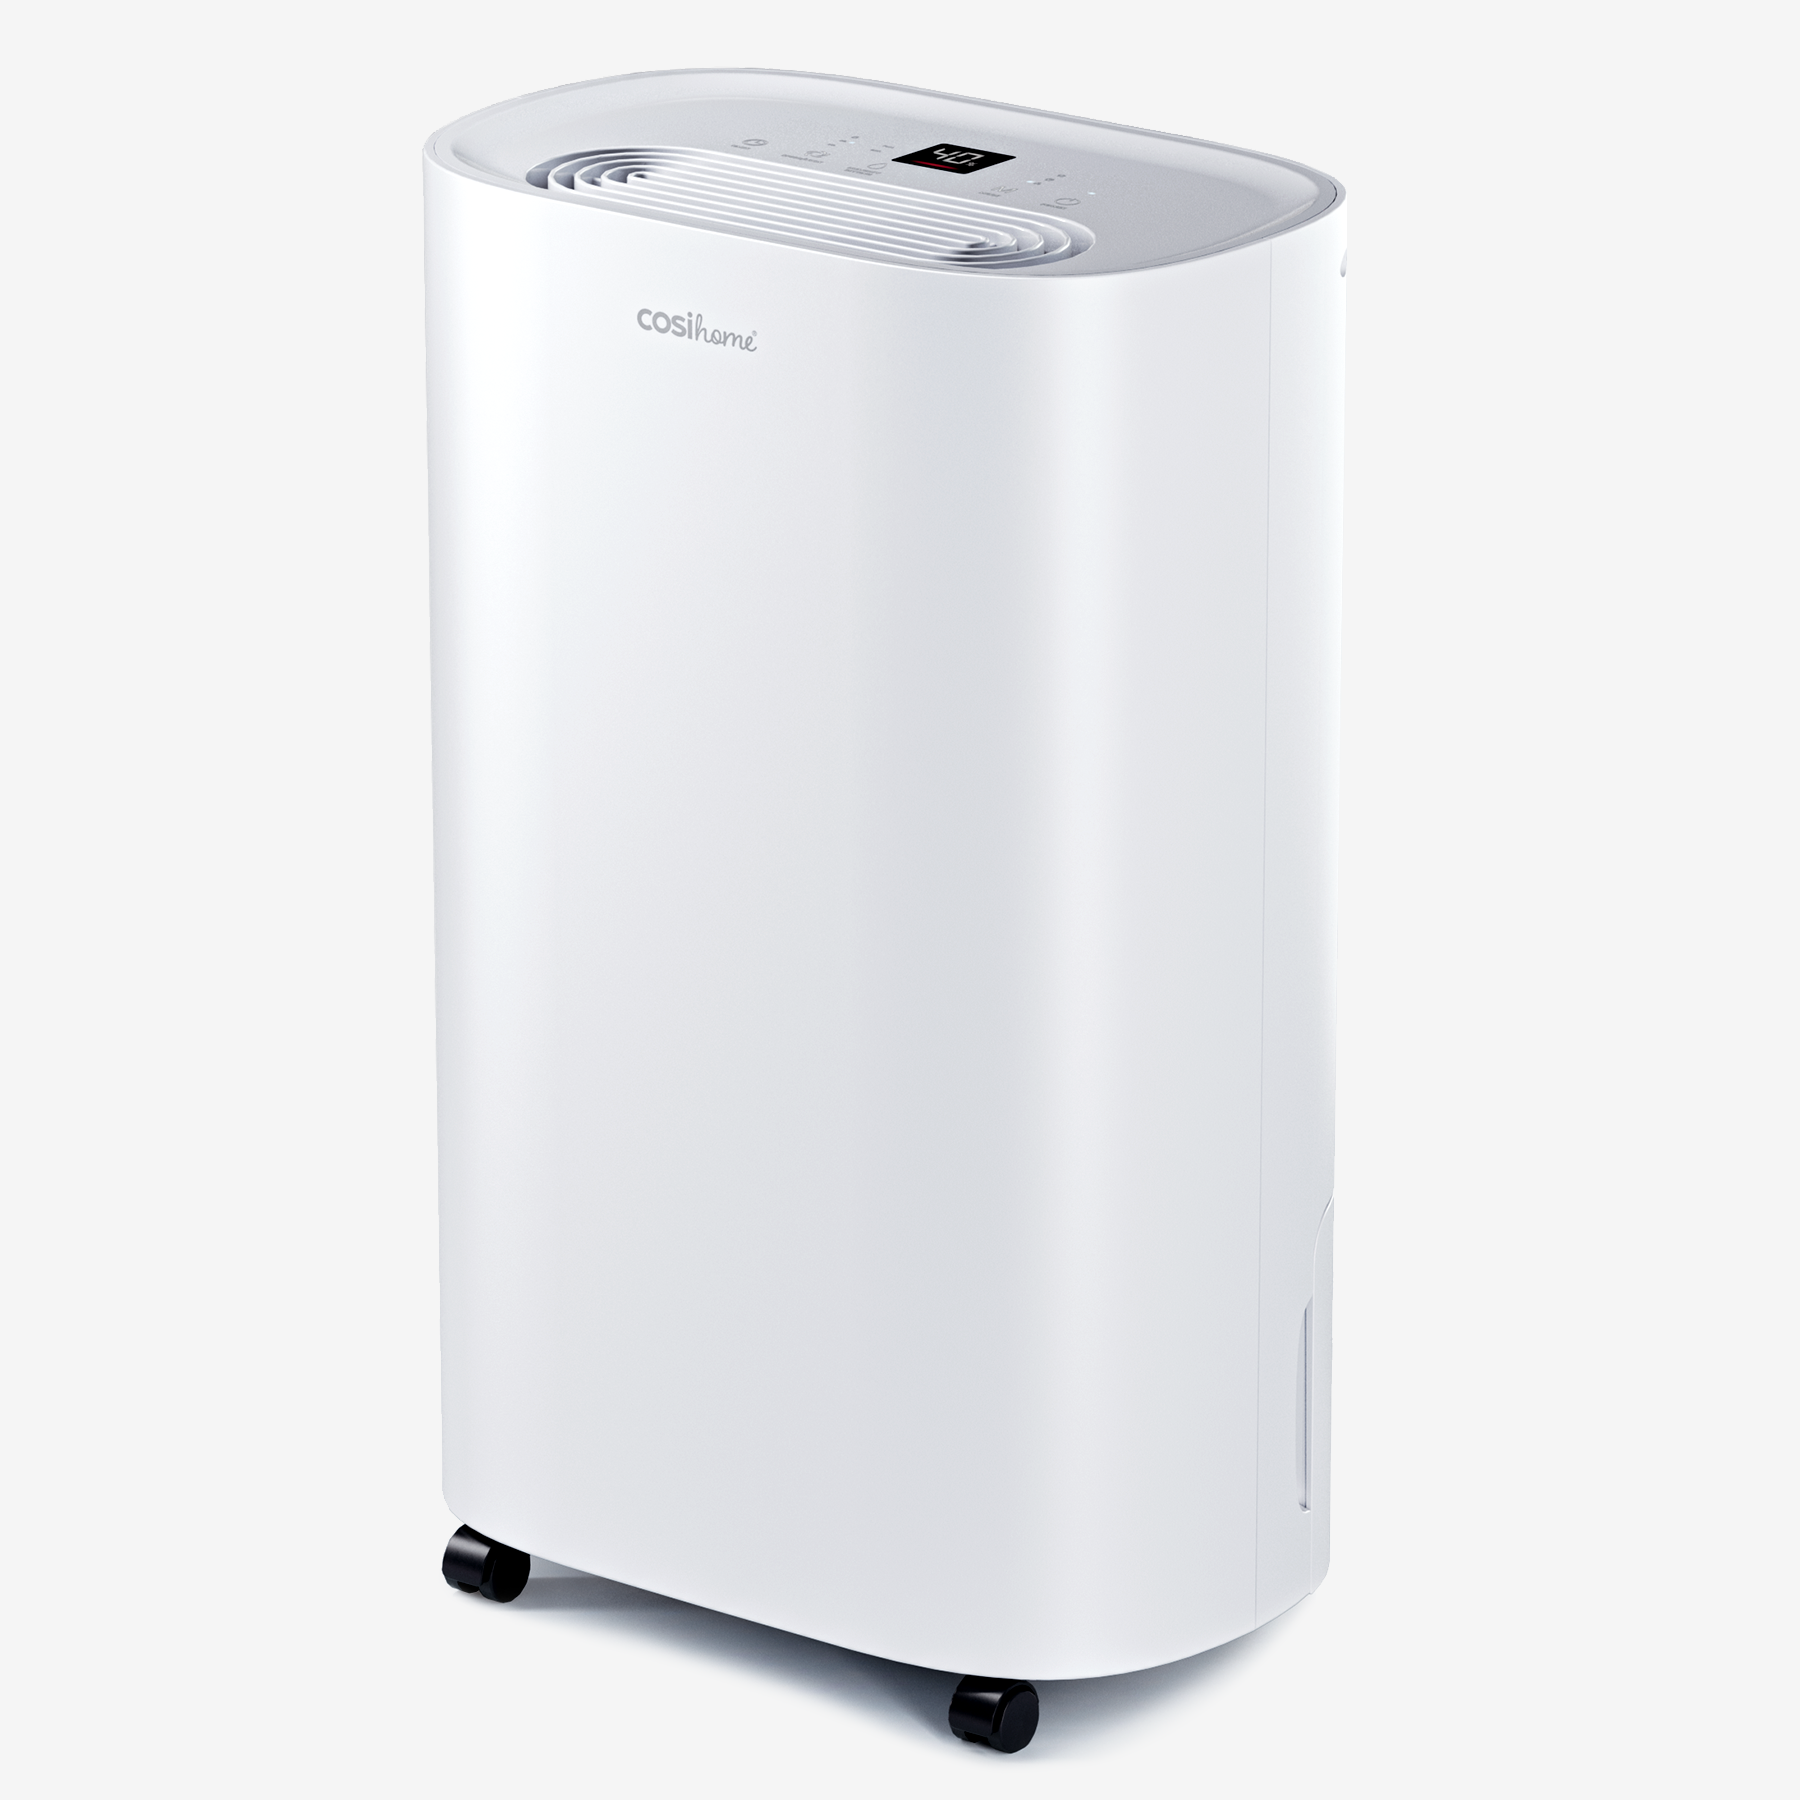 25L High Capacity Dehumidifier with 6.5L Water Tank